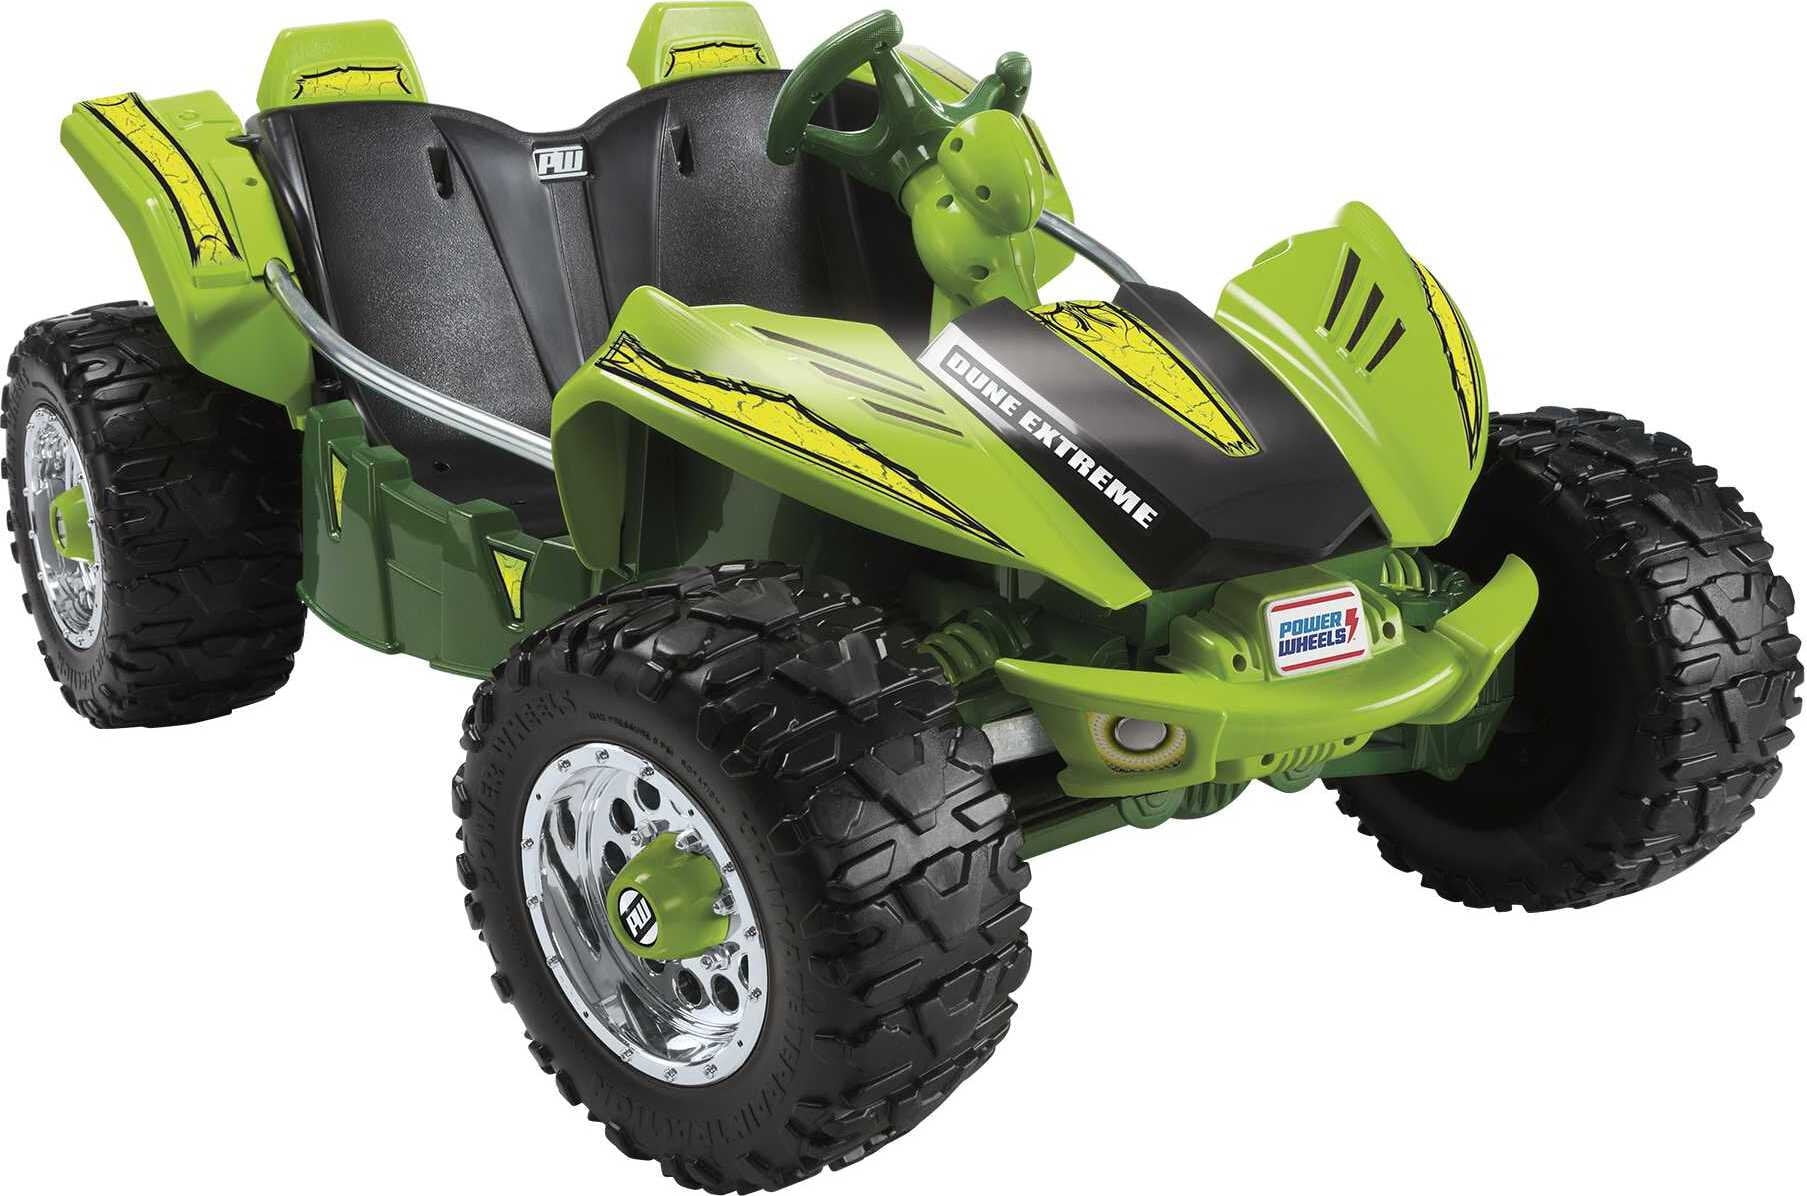 Power Wheels Dune Racer Extreme Battery-Powered Ride-On Vehicle with Storage Area, Green